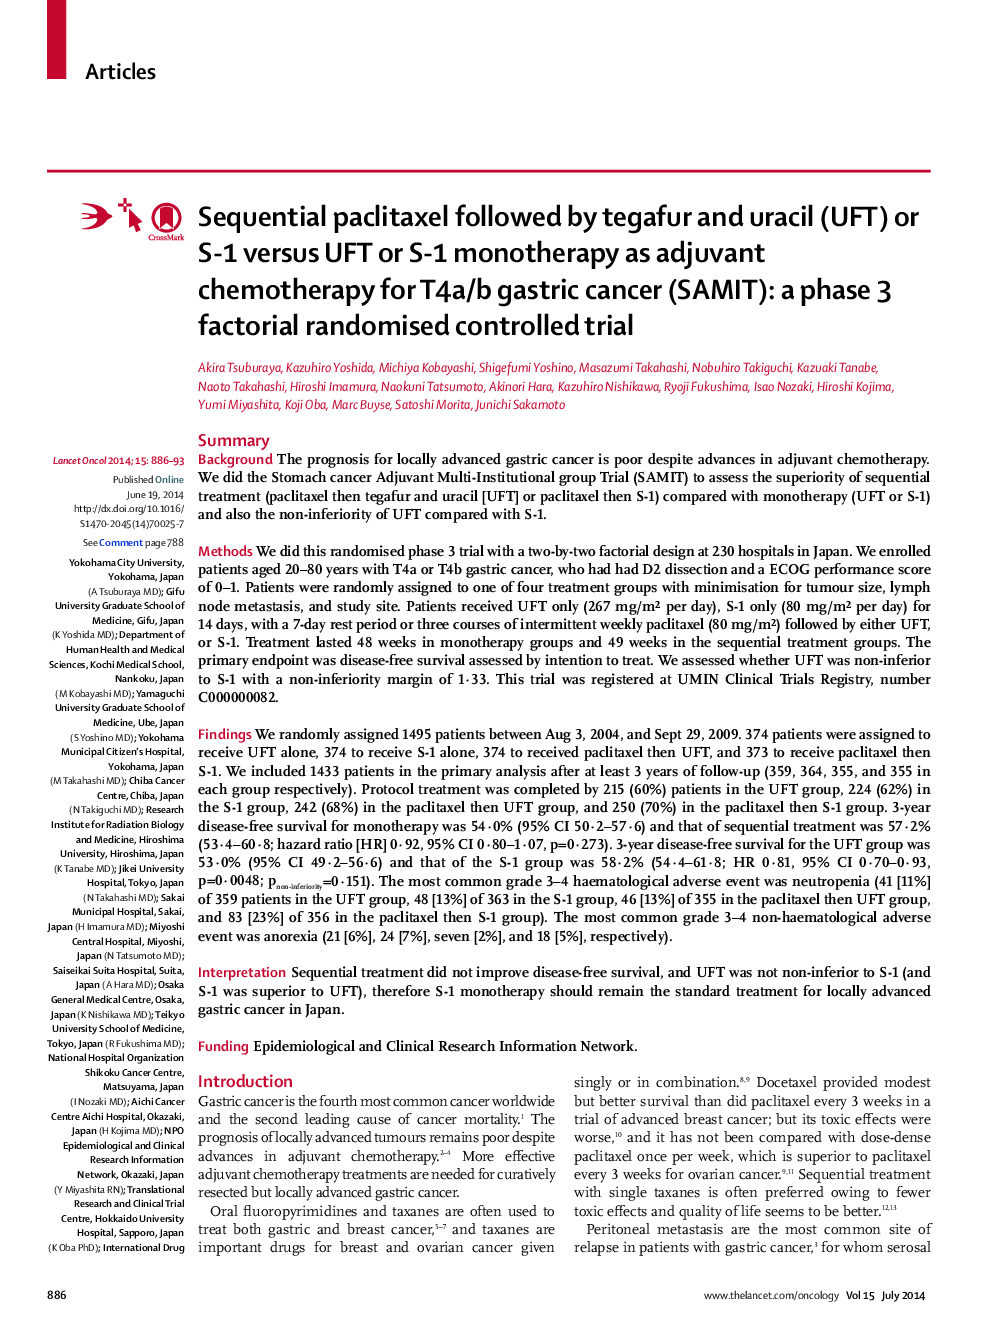 Sequential paclitaxel followed by tegafur and uracil (UFT) or S-1 versus UFT or S-1 monotherapy as adjuvant chemotherapy for T4a/b gastric cancer (SAMIT): a phase 3 factorial randomised controlled trial